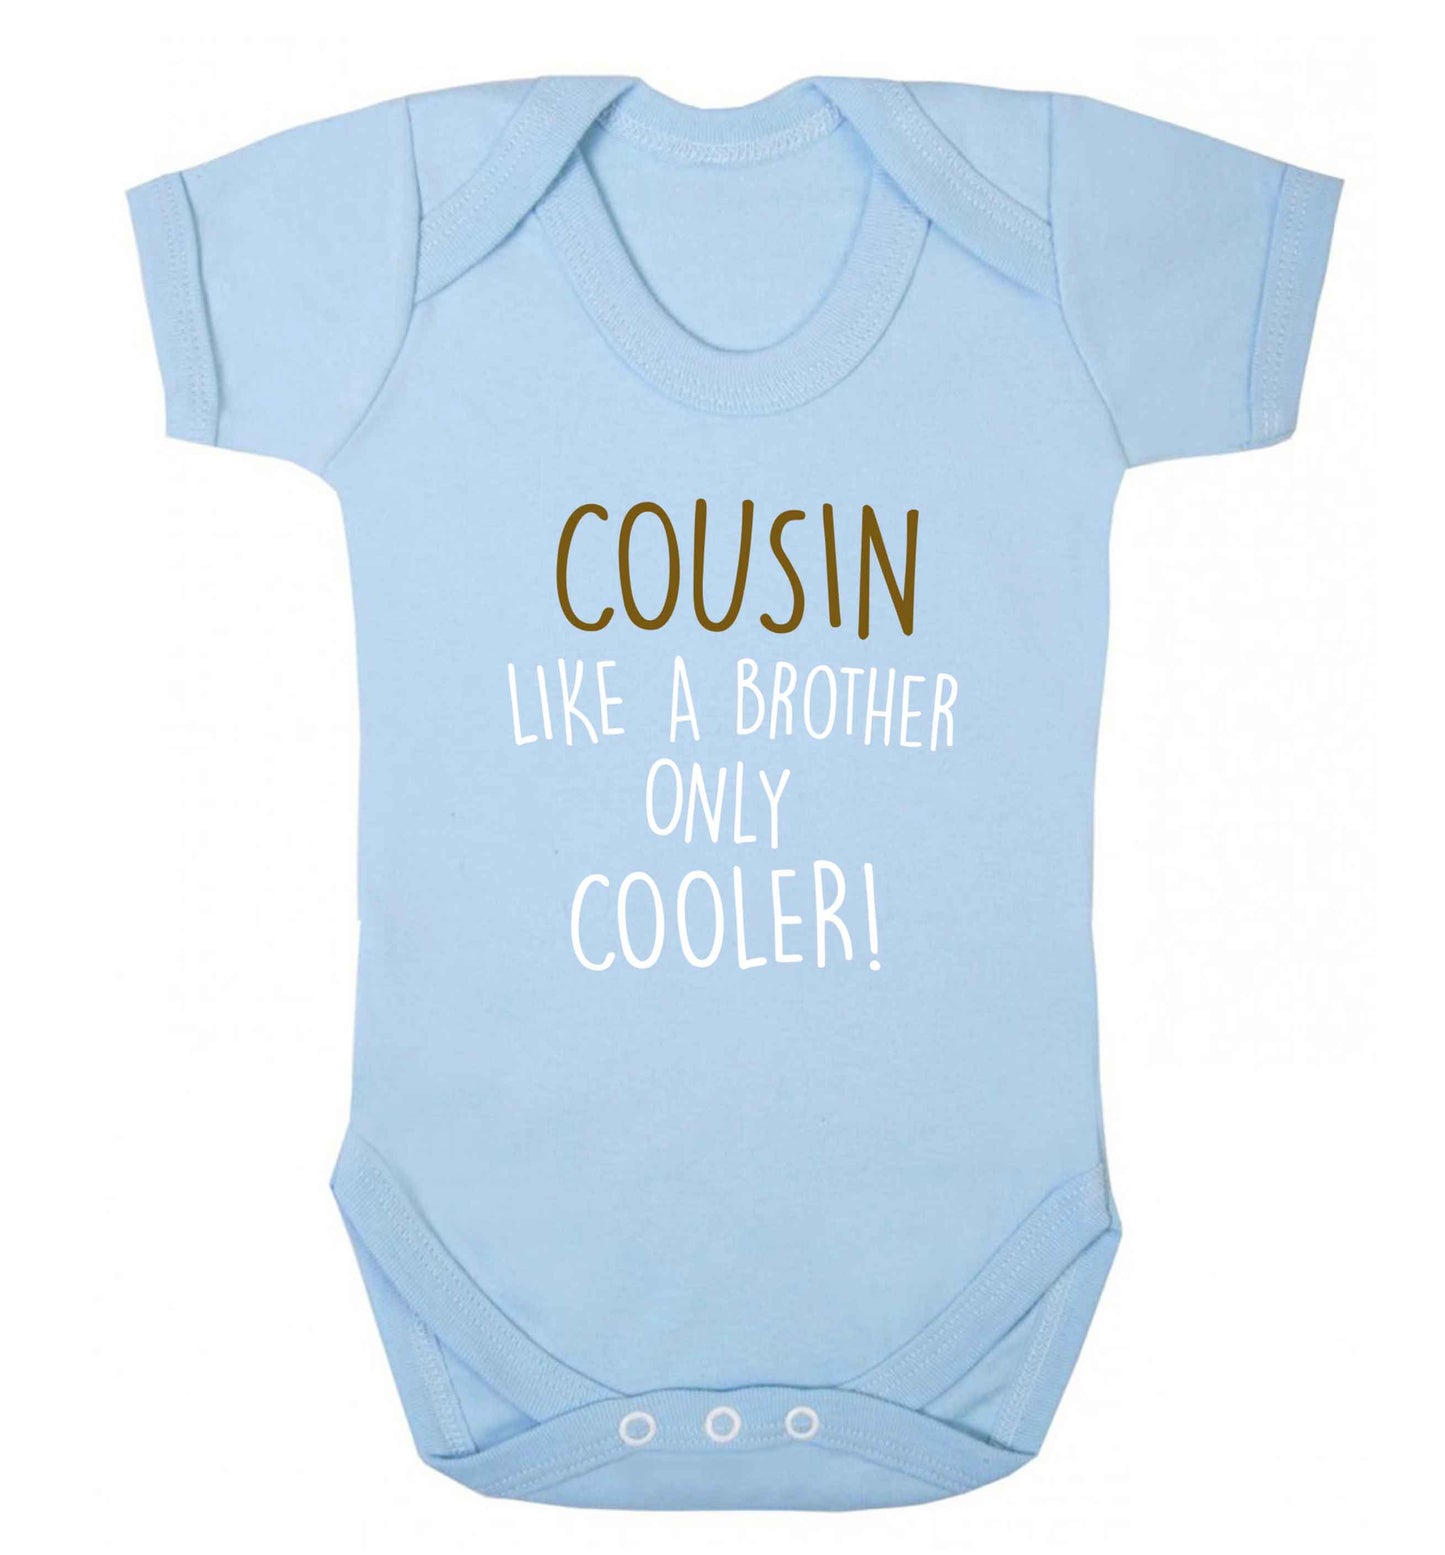 Cousin like a brother only cooler baby vest pale blue 18-24 months